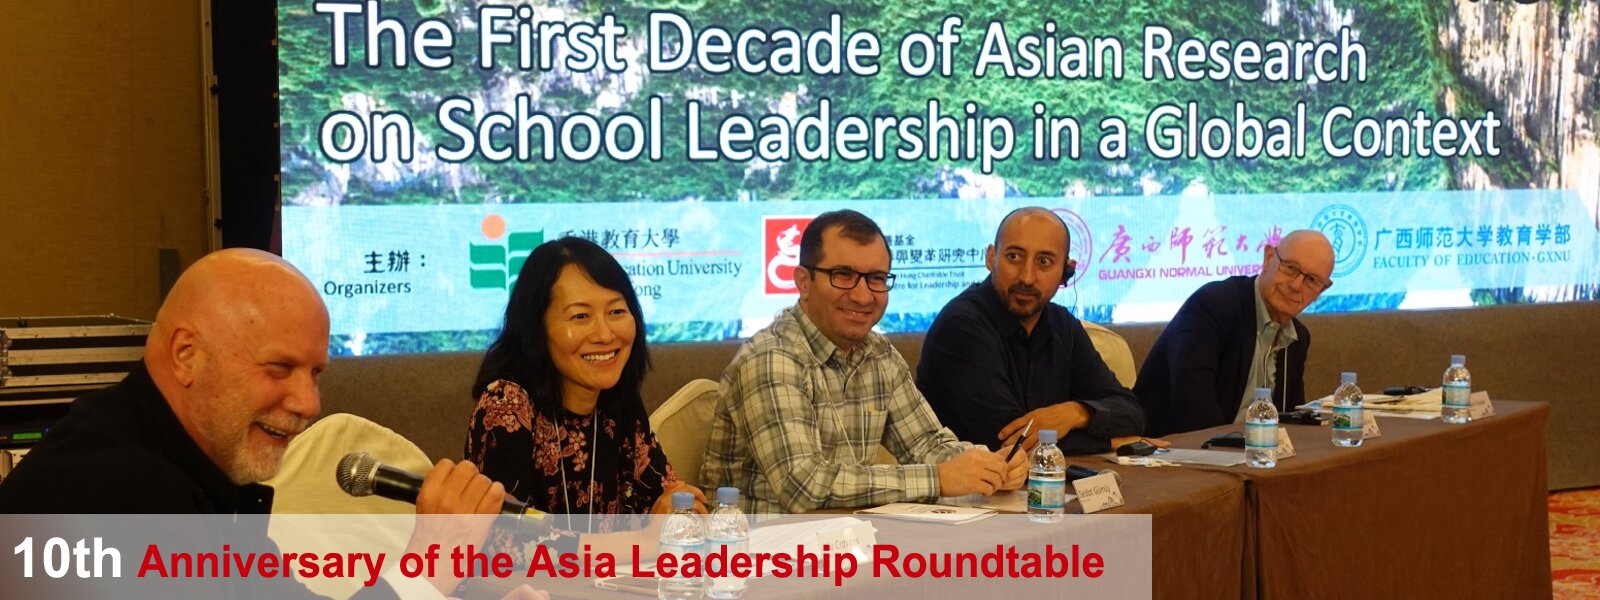 10th Anniversary of the Asia Leadership Roundtable